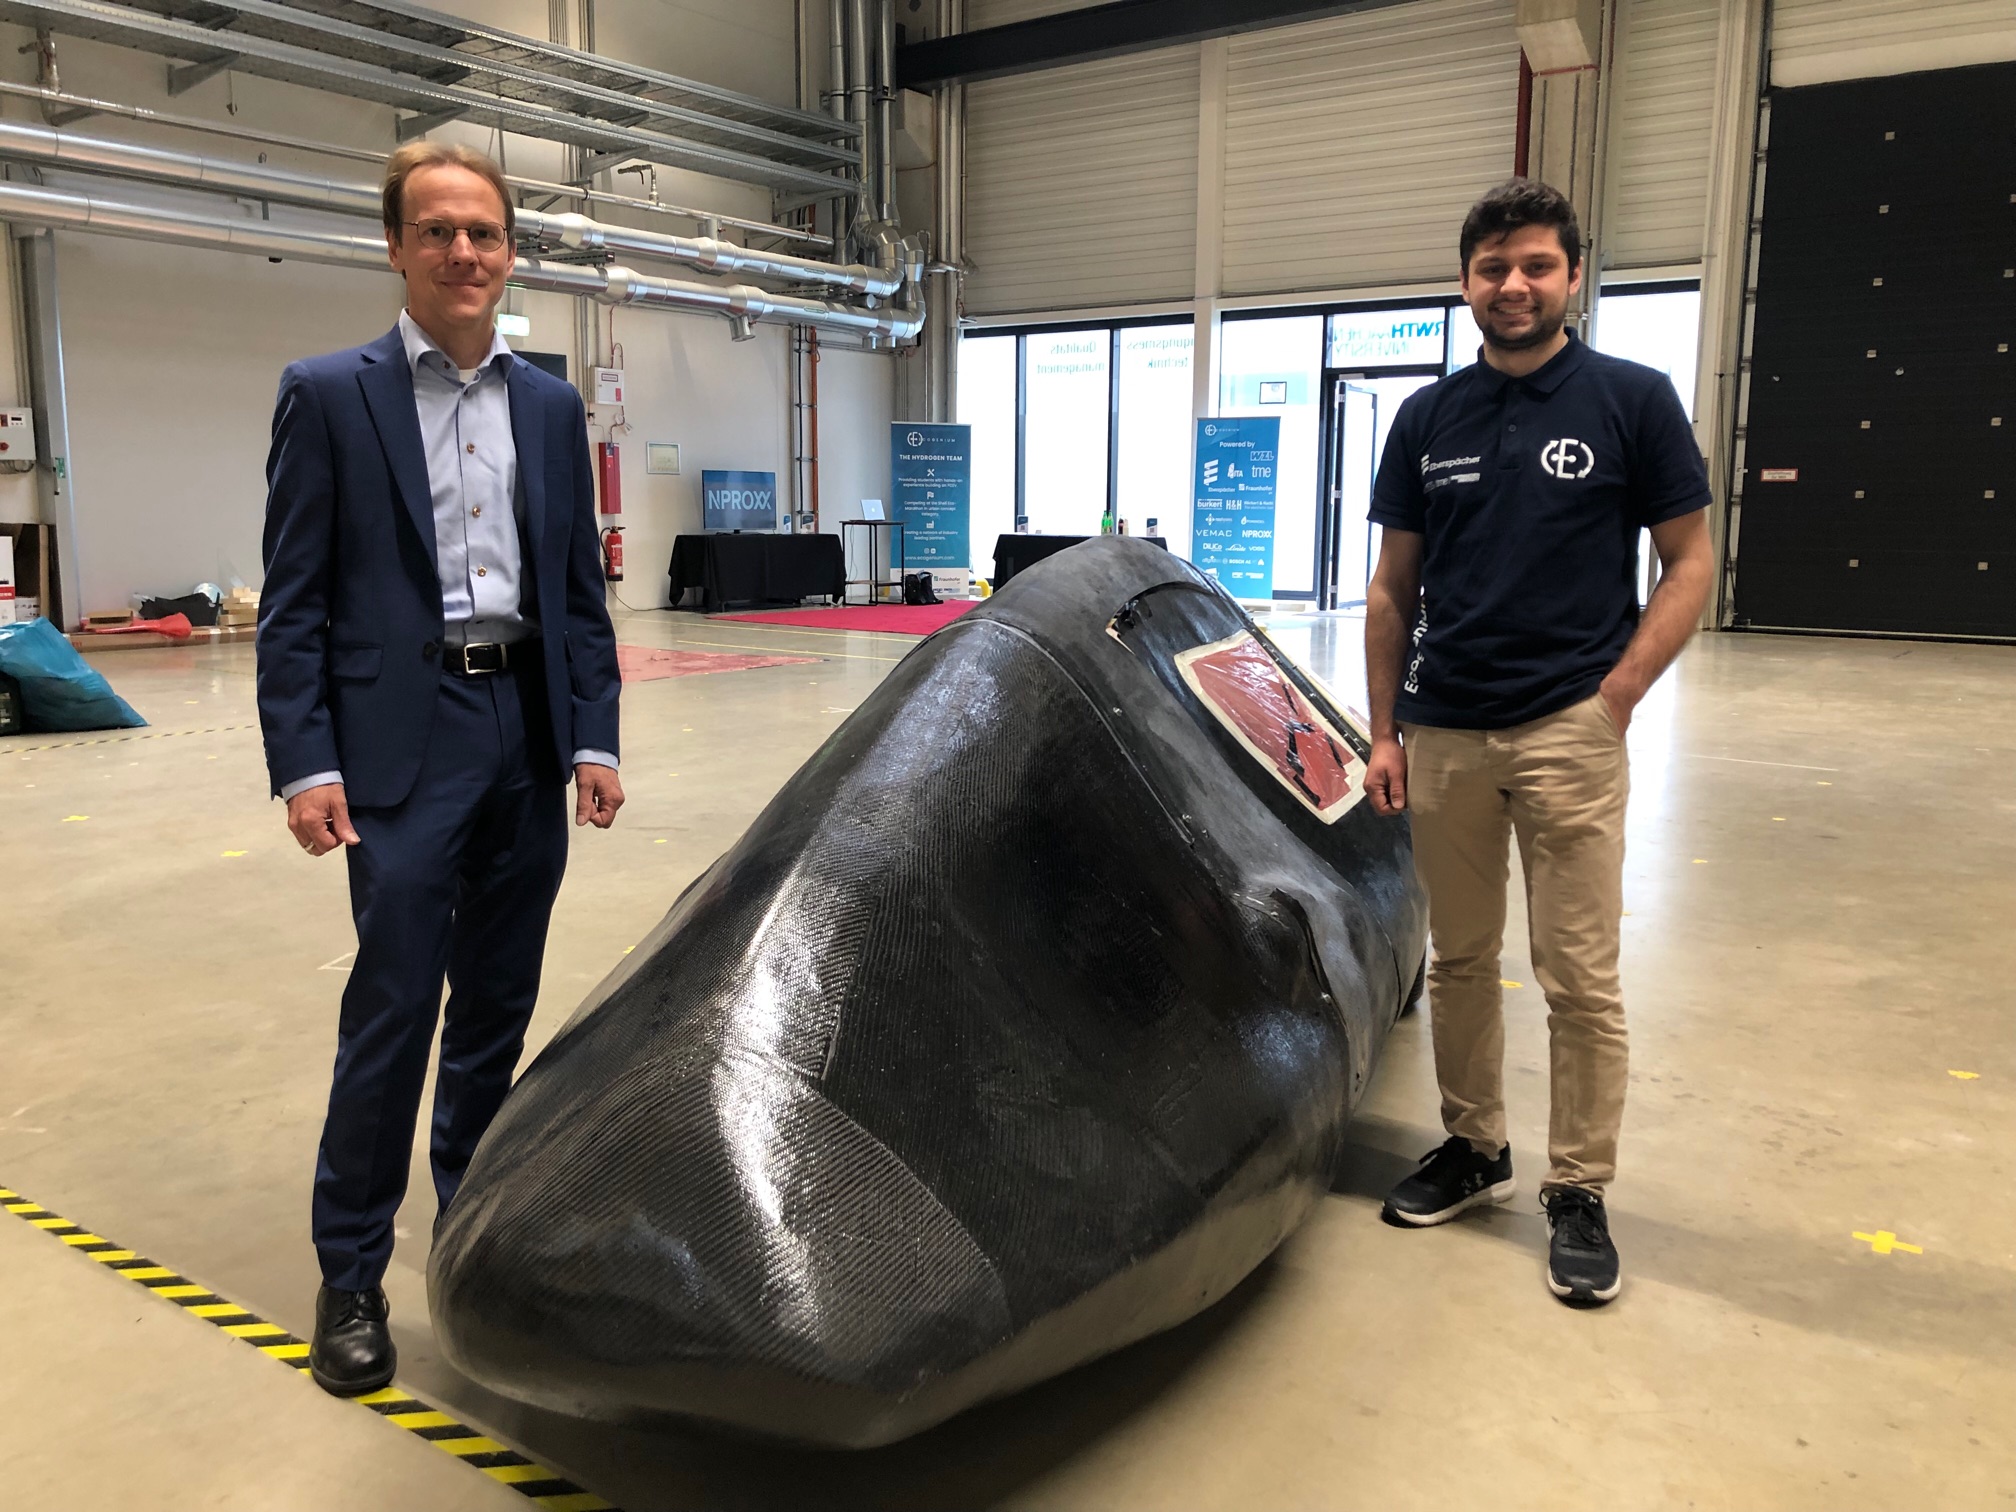 Klaus Peter Kopper standing with a member of the Ecogenium team with the Fuel Cell Electric Vehicle